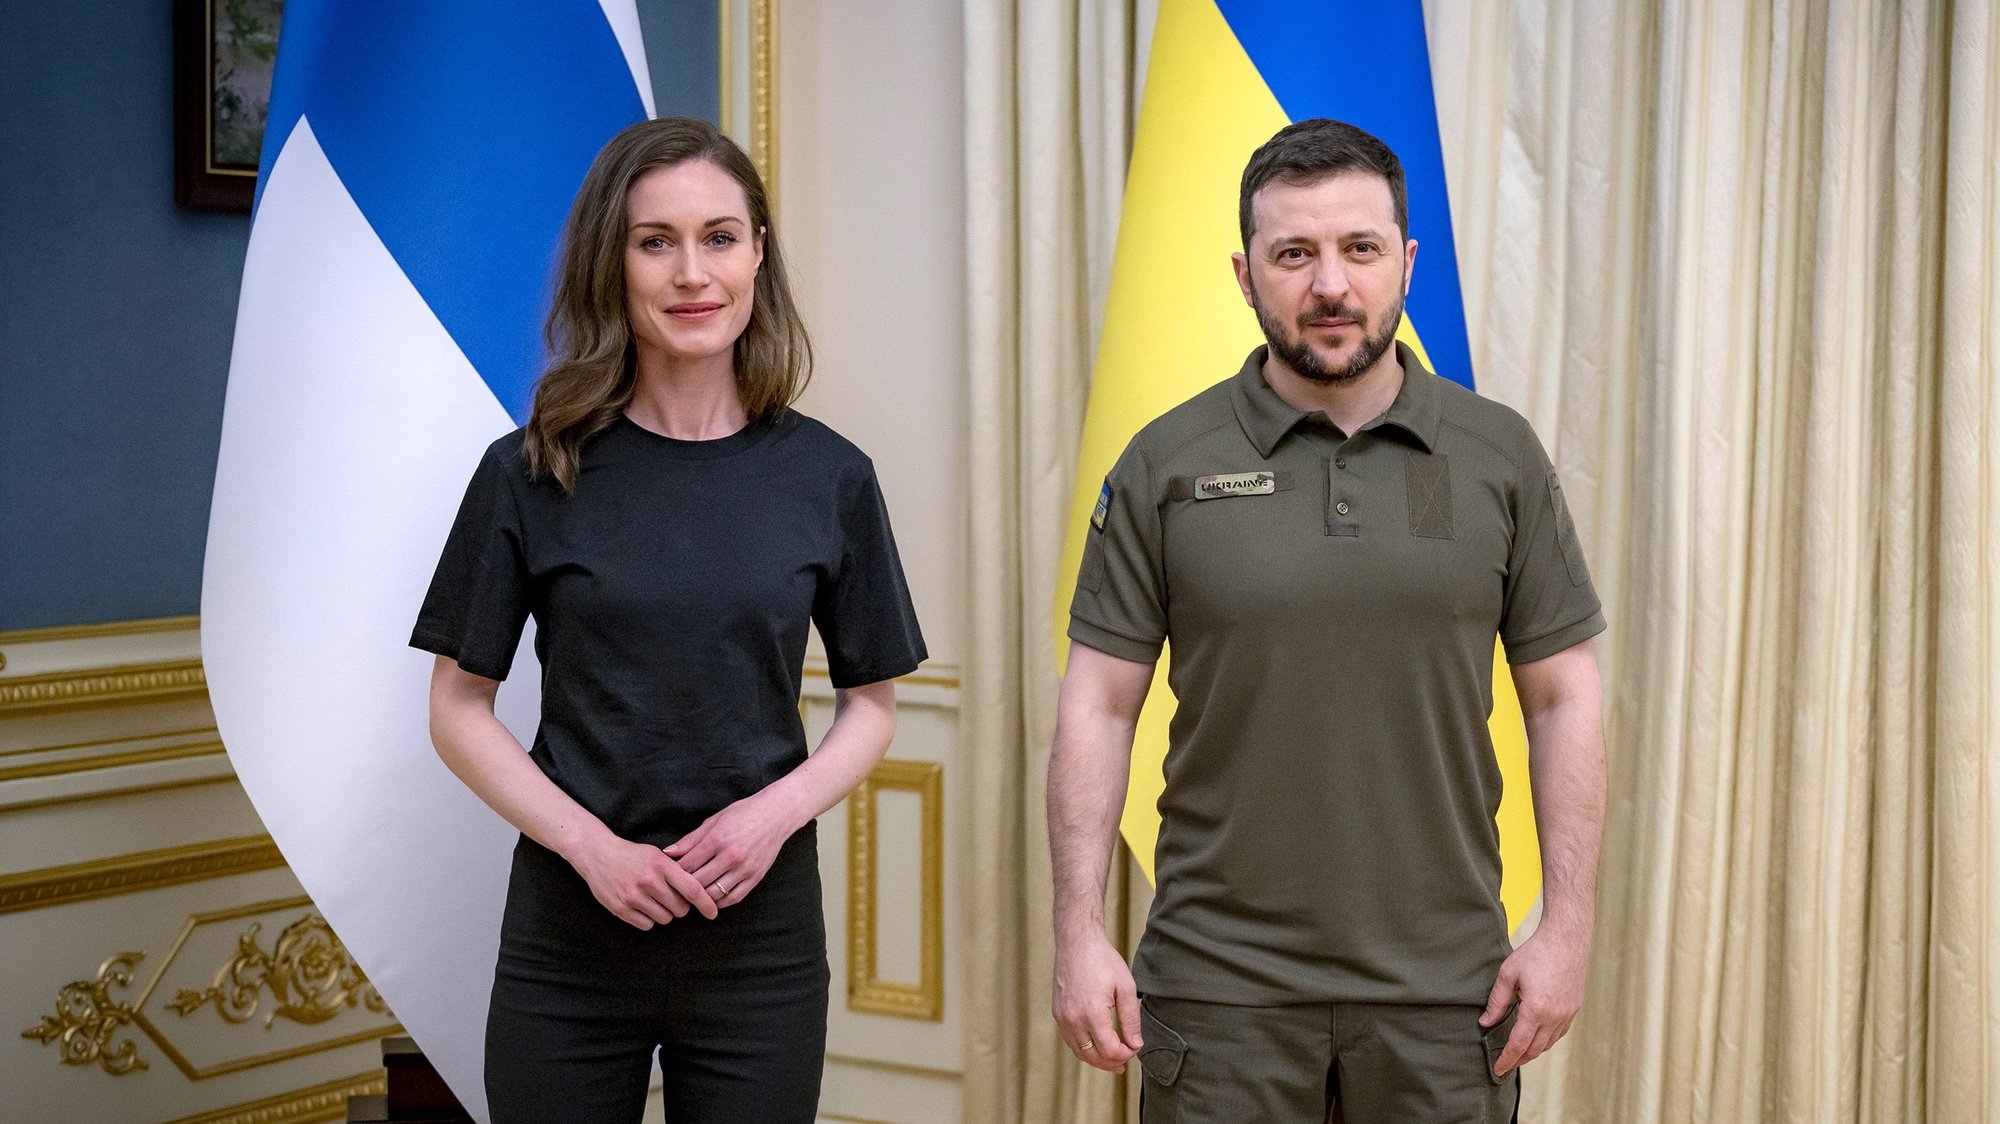 epa09977210 A handout photo made available by the Ukrainian Presidential Press Service shows Ukrainian President Volodymyr Zelensky (R) and Finnish Prime Minister Sanna Marin (L) posing for a photo during their meeting in Kyiv, Ukraine, 26 May 2022. Marin visits Ukraine for the first time amid the Russian invasion. Finland&#039;s Parliament on 17 May approved the country&#039;s application for NATO membership as a result of Russia&#039;s invasion of Ukraine. On 24 February, Russian troops invaded Ukrainian territory starting a conflict that has provoked destruction and a humanitarian crisis.  EPA/UKRAINE PRESIDENTIAL PRESS SERVICE / HANDOUT  HANDOUT EDITORIAL USE ONLY/NO SALES